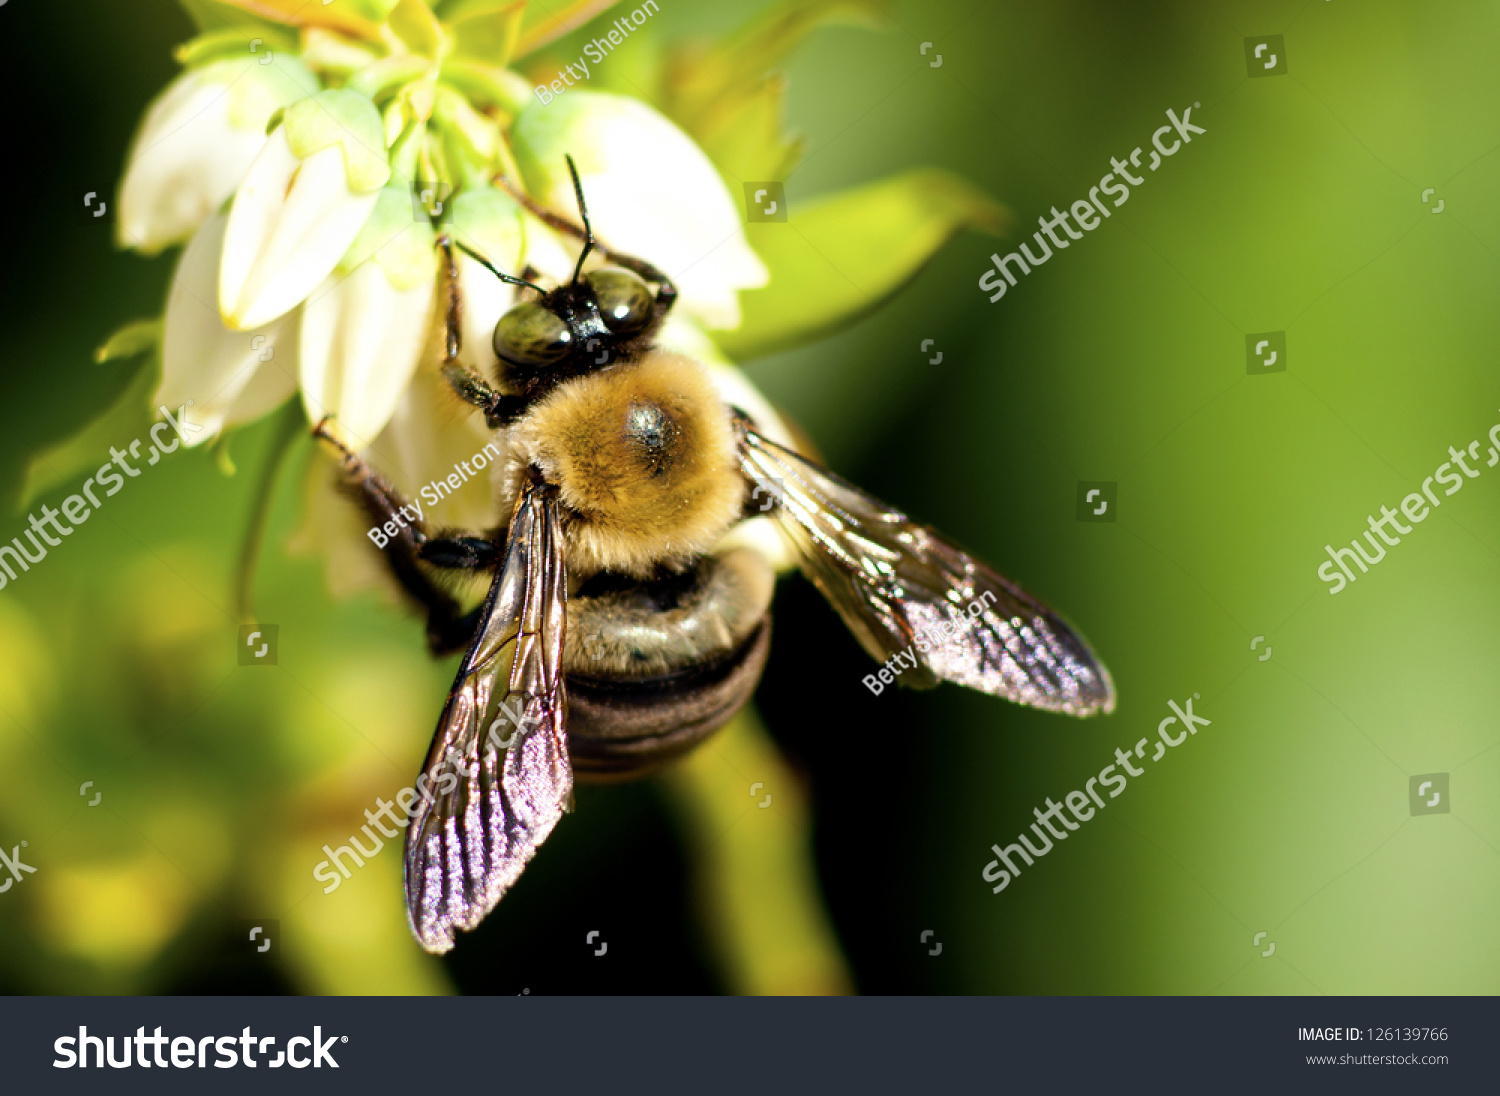 A bumble bee feeds on blueberry blooms. #126139766